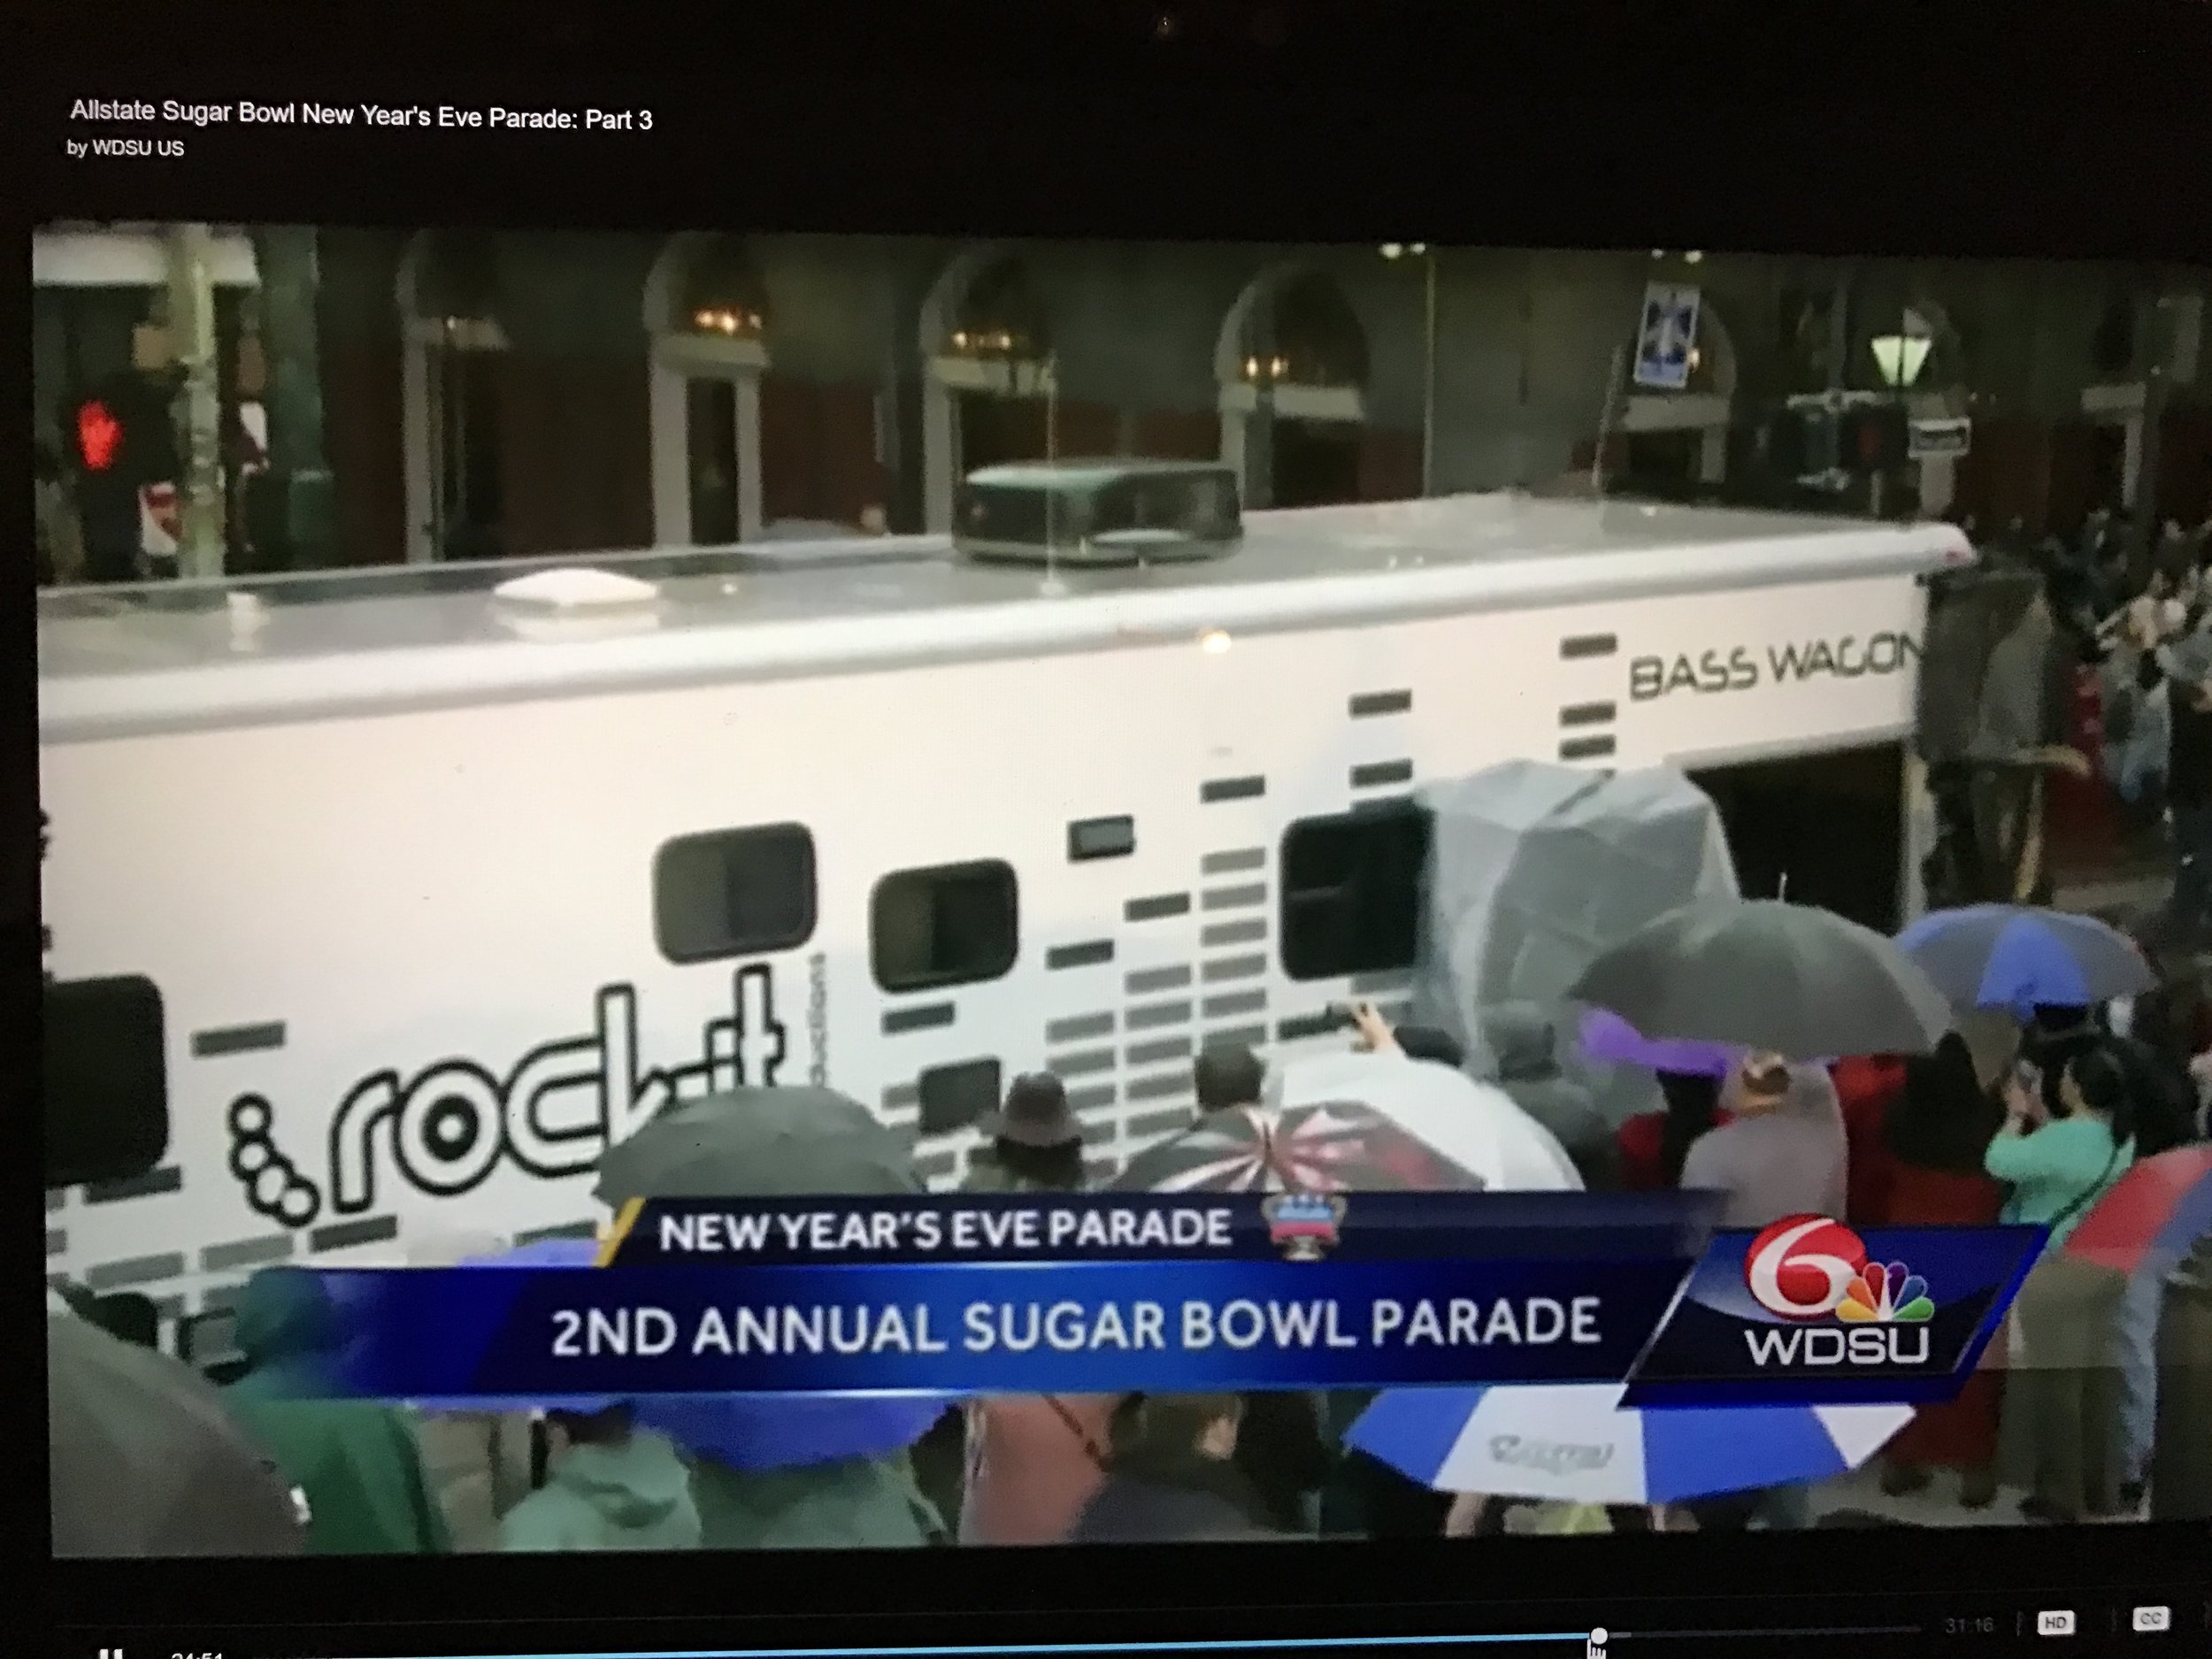 Bass Wagon rolled in The Allstate Sugar Bowl Parade, New Orleans